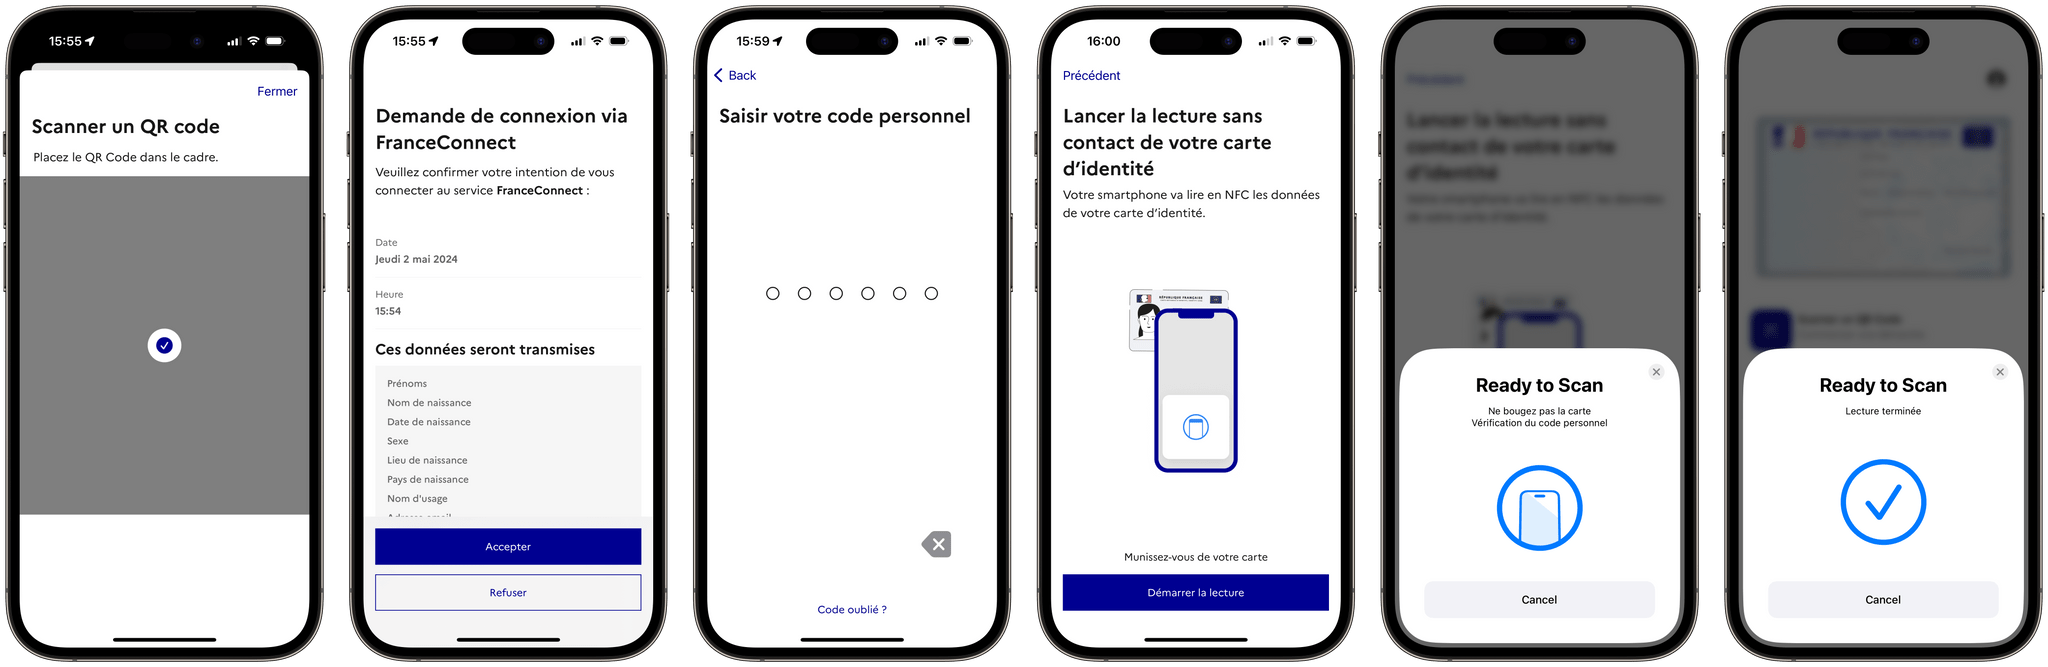 Using France Identité to log in to an online public service is a five-step process involving scanning a QR code, approving the connection, entering your ID passcode, and scanning your physical ID card.